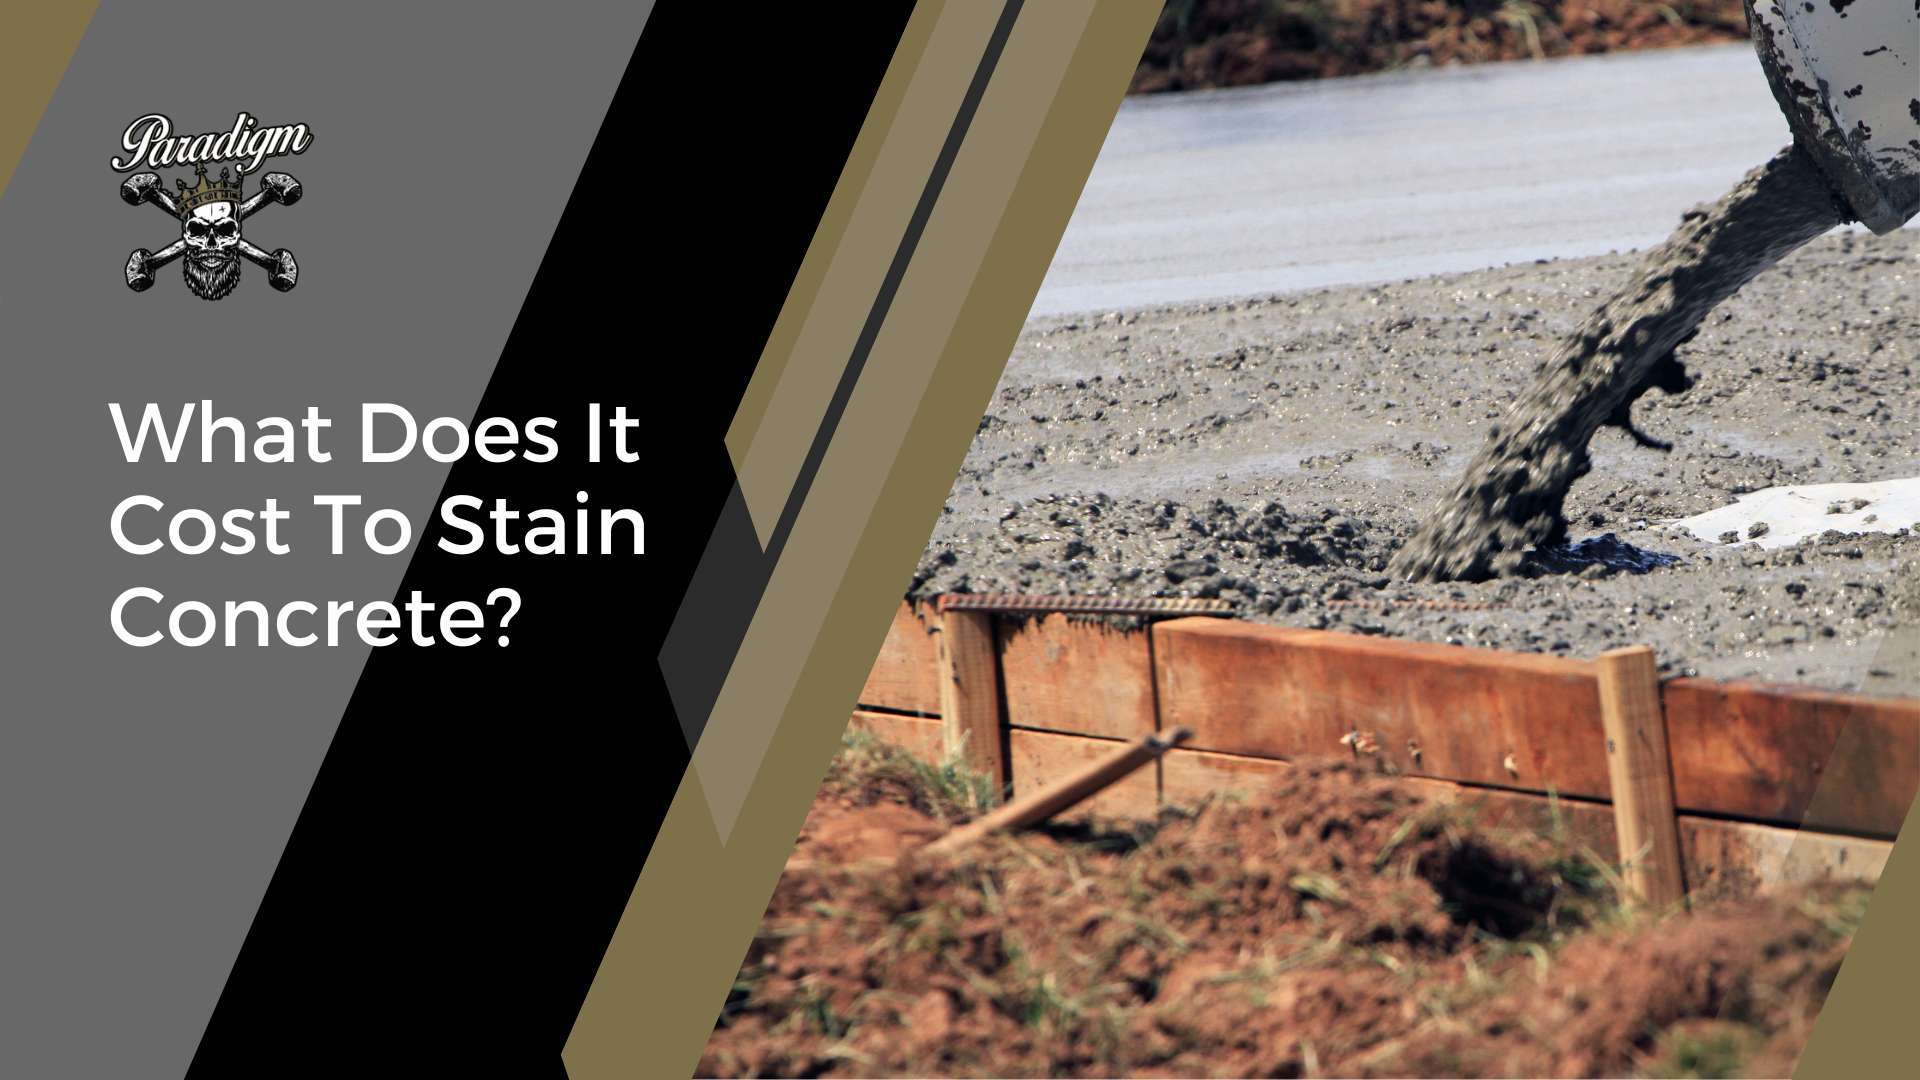 What Does It Cost To Stain Concrete